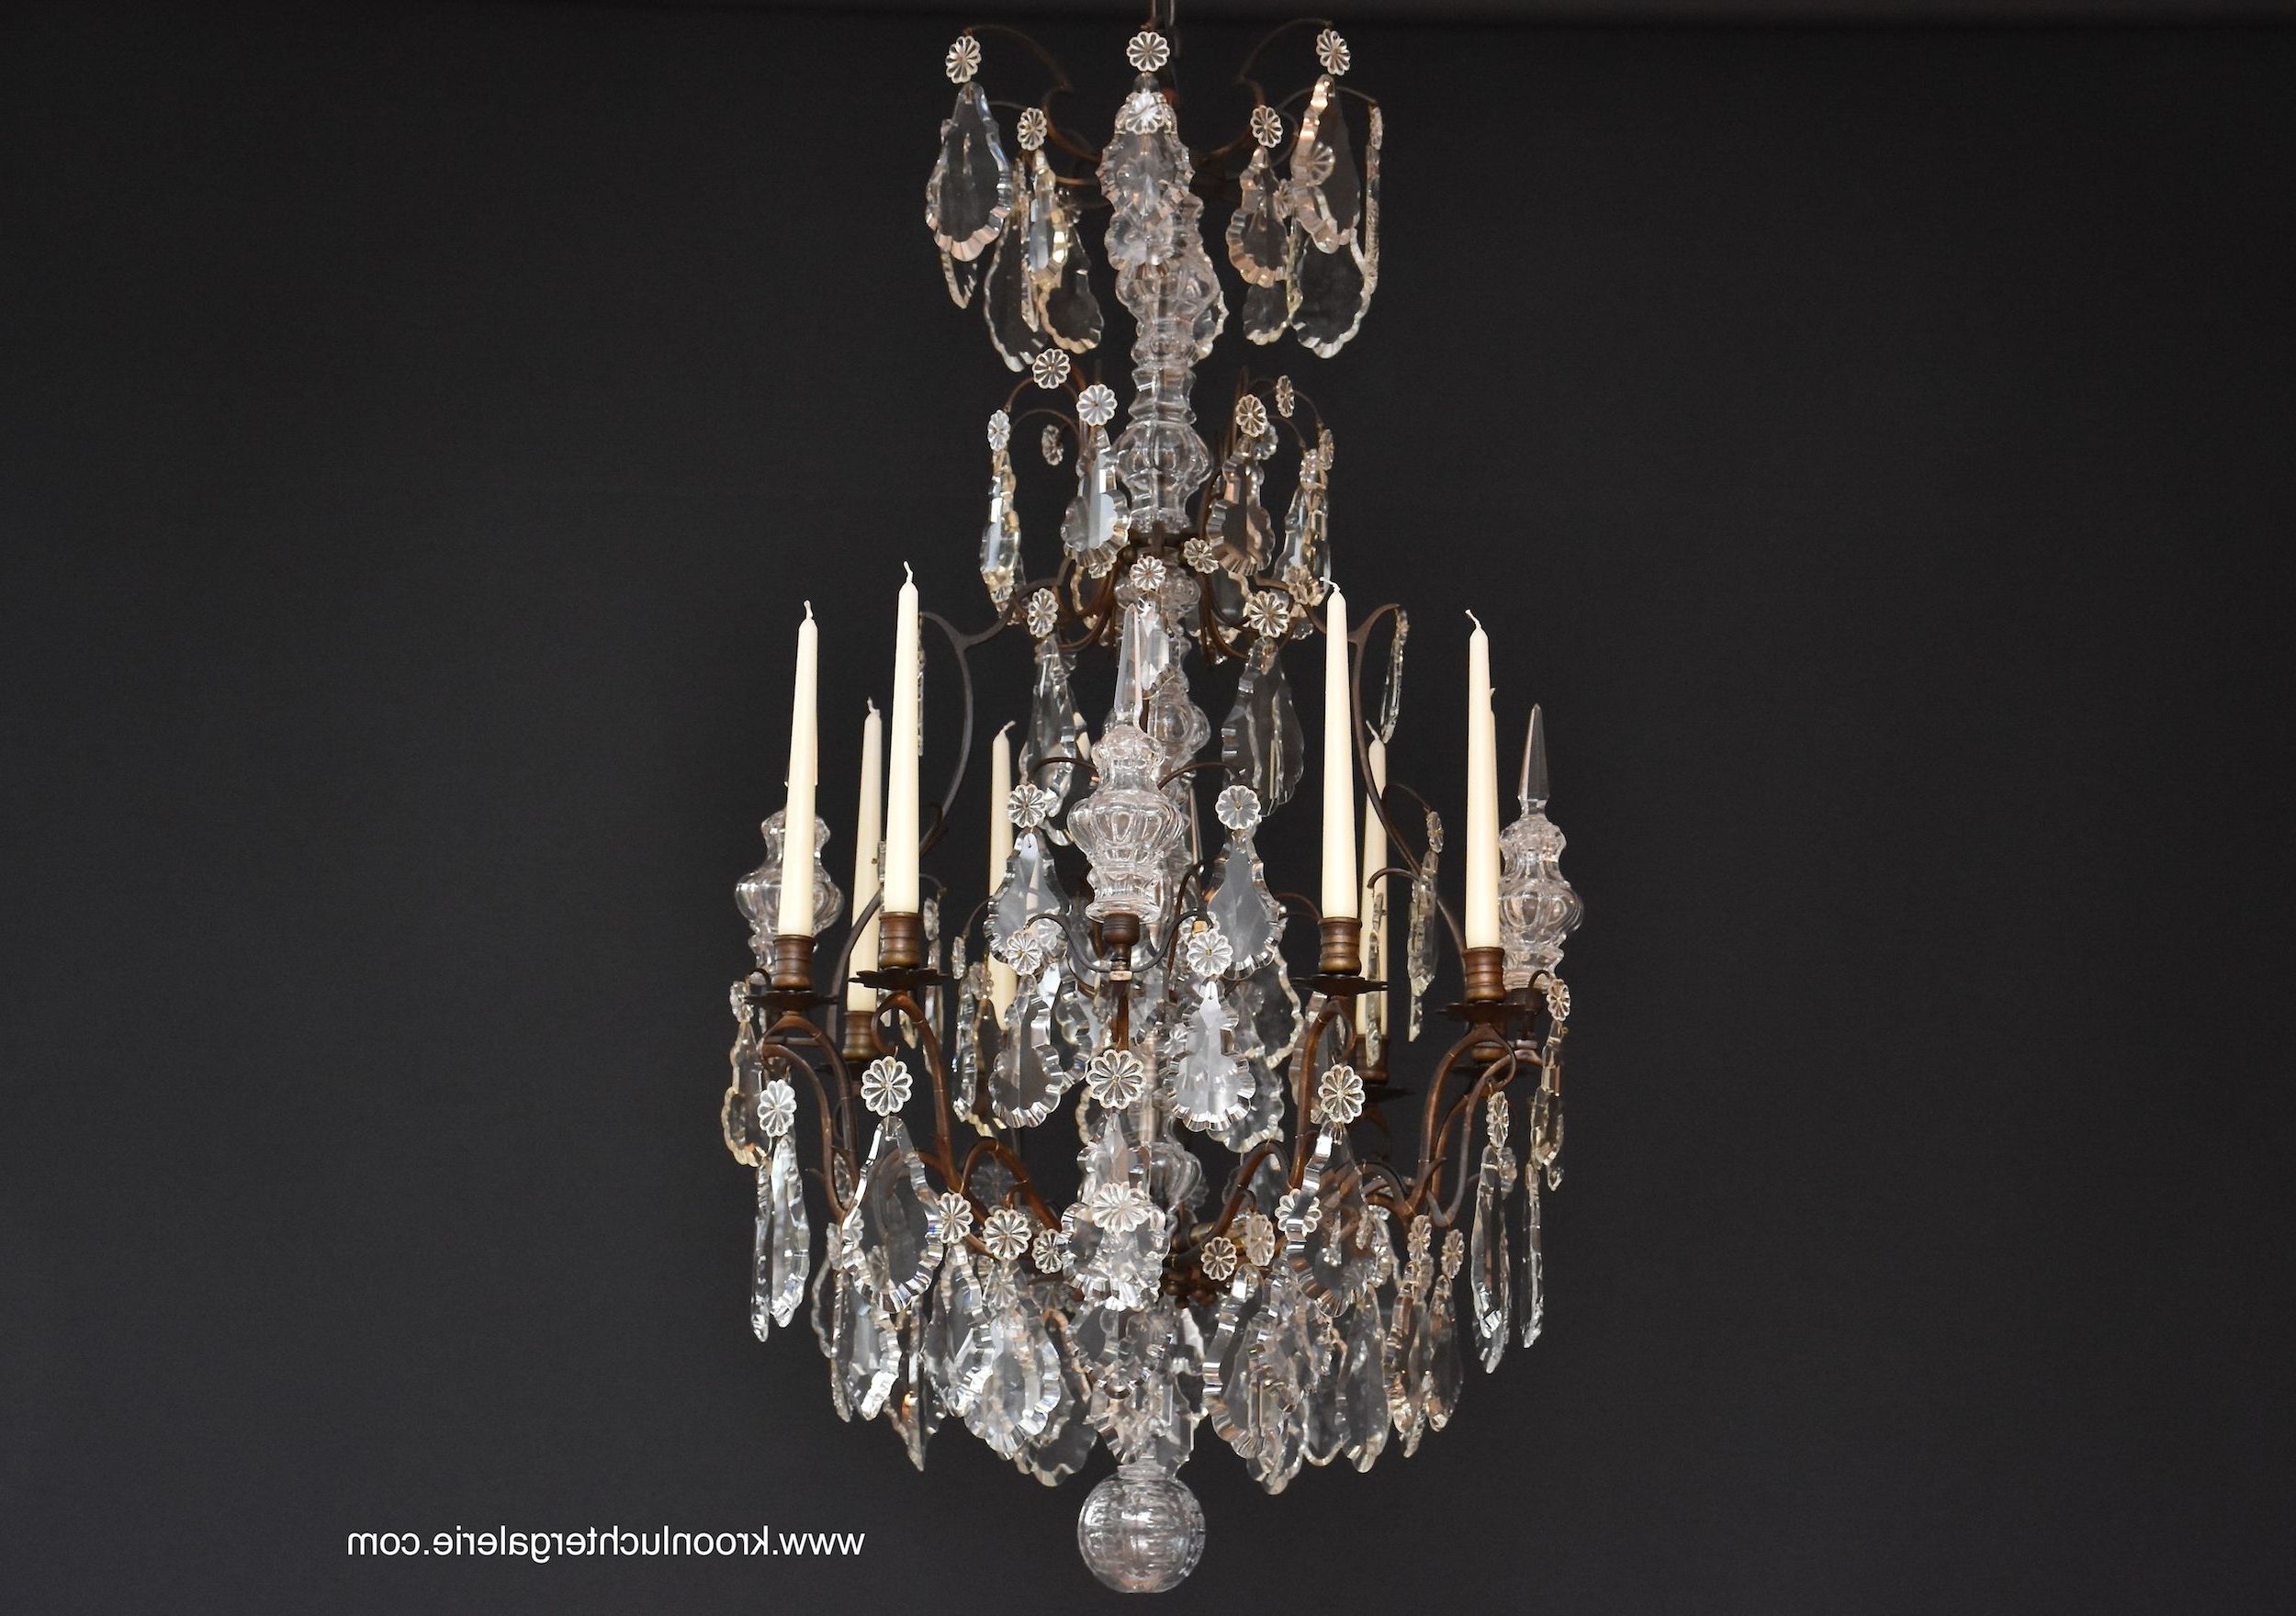 French Chandelier In Style Of Louis Xv, Ref (View 7 of 20)